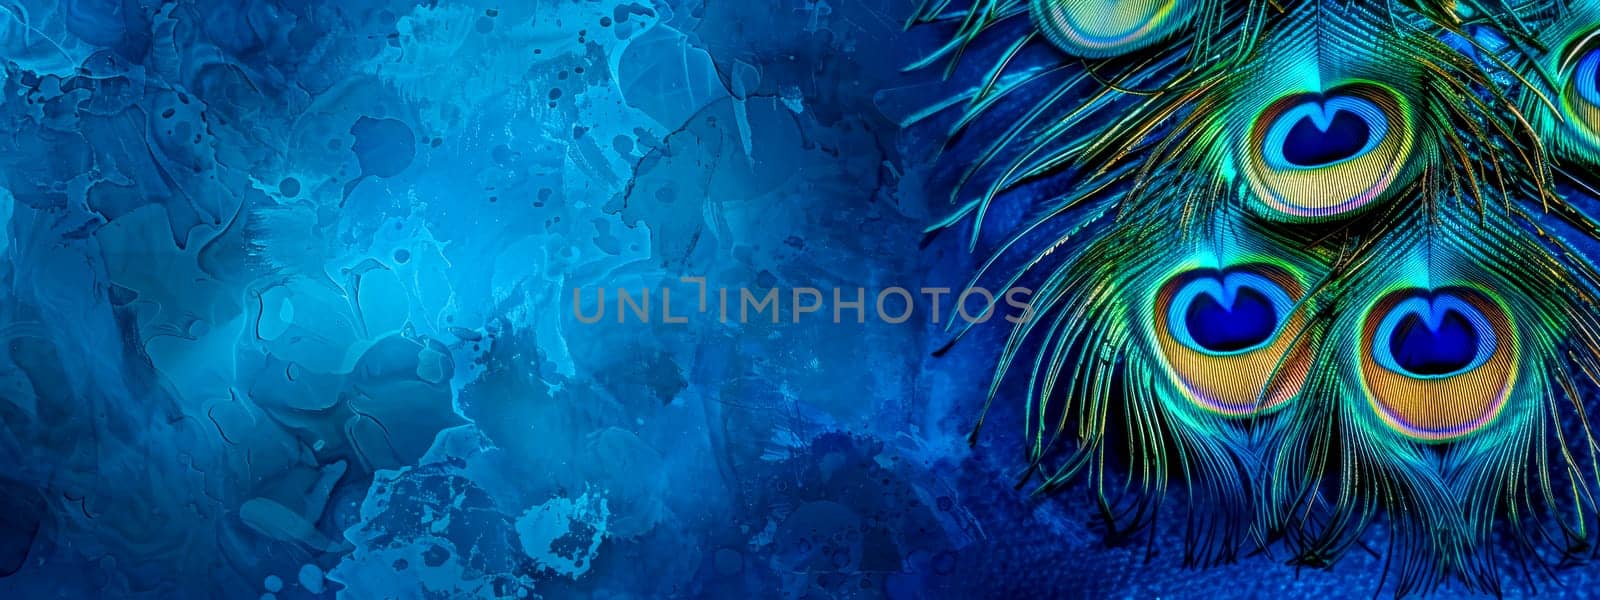 Abstract graphic composition with peacock feathers over a textured blue background